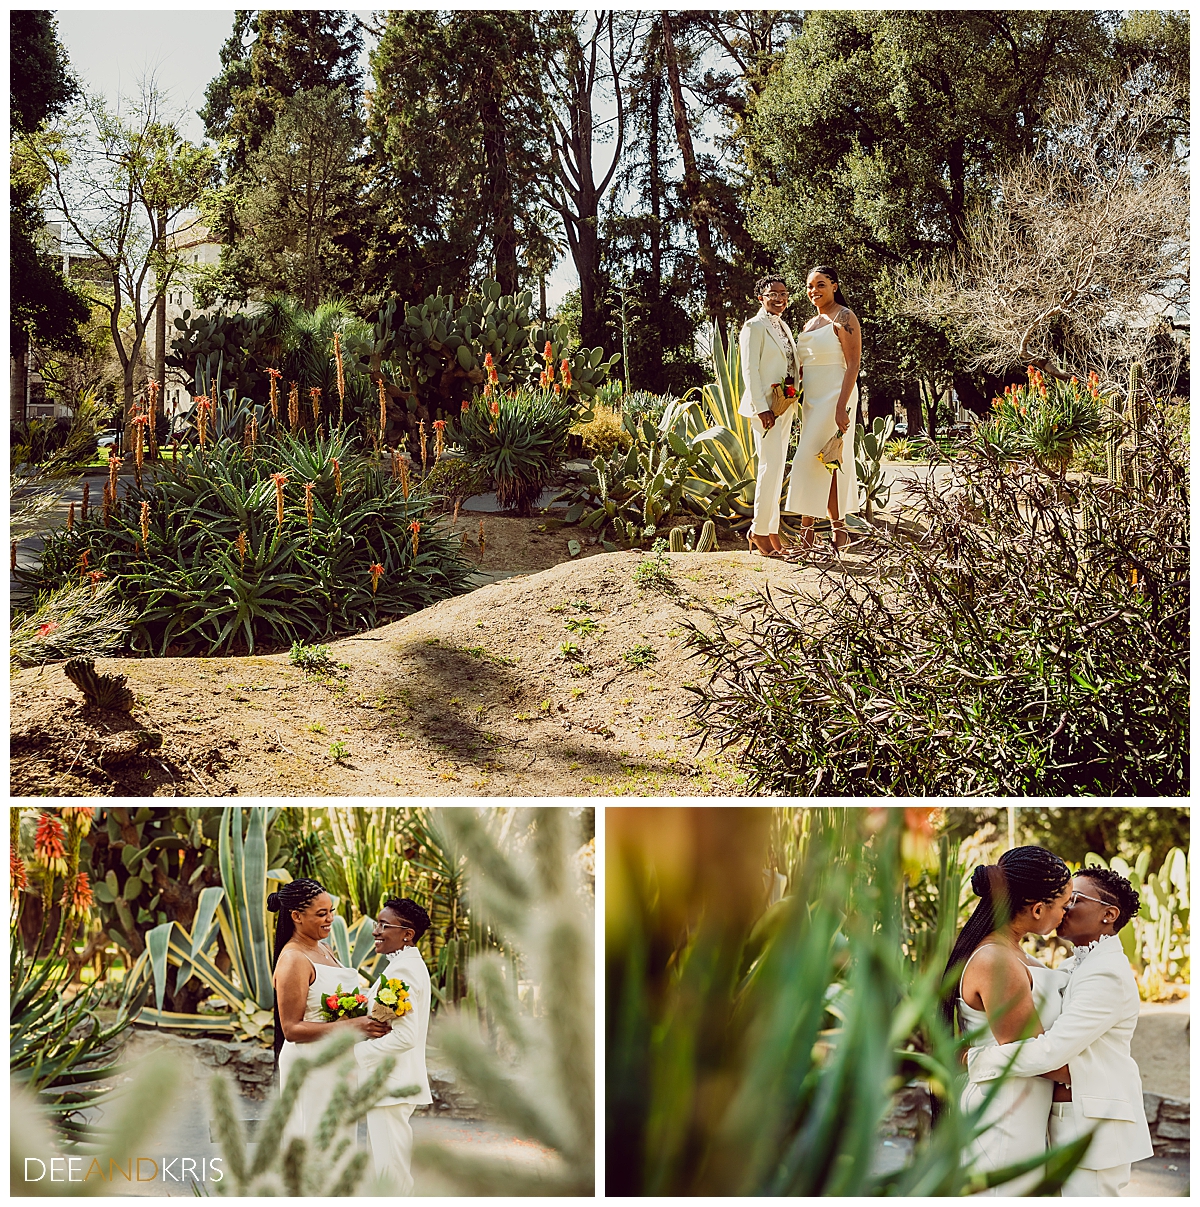 Three images: Top image of couple standing together among the cactus garden. Bottom left POV image of couple viewed from behind a cactus. Bottom right POV image of couple kissing viewed from behind a flower bush.